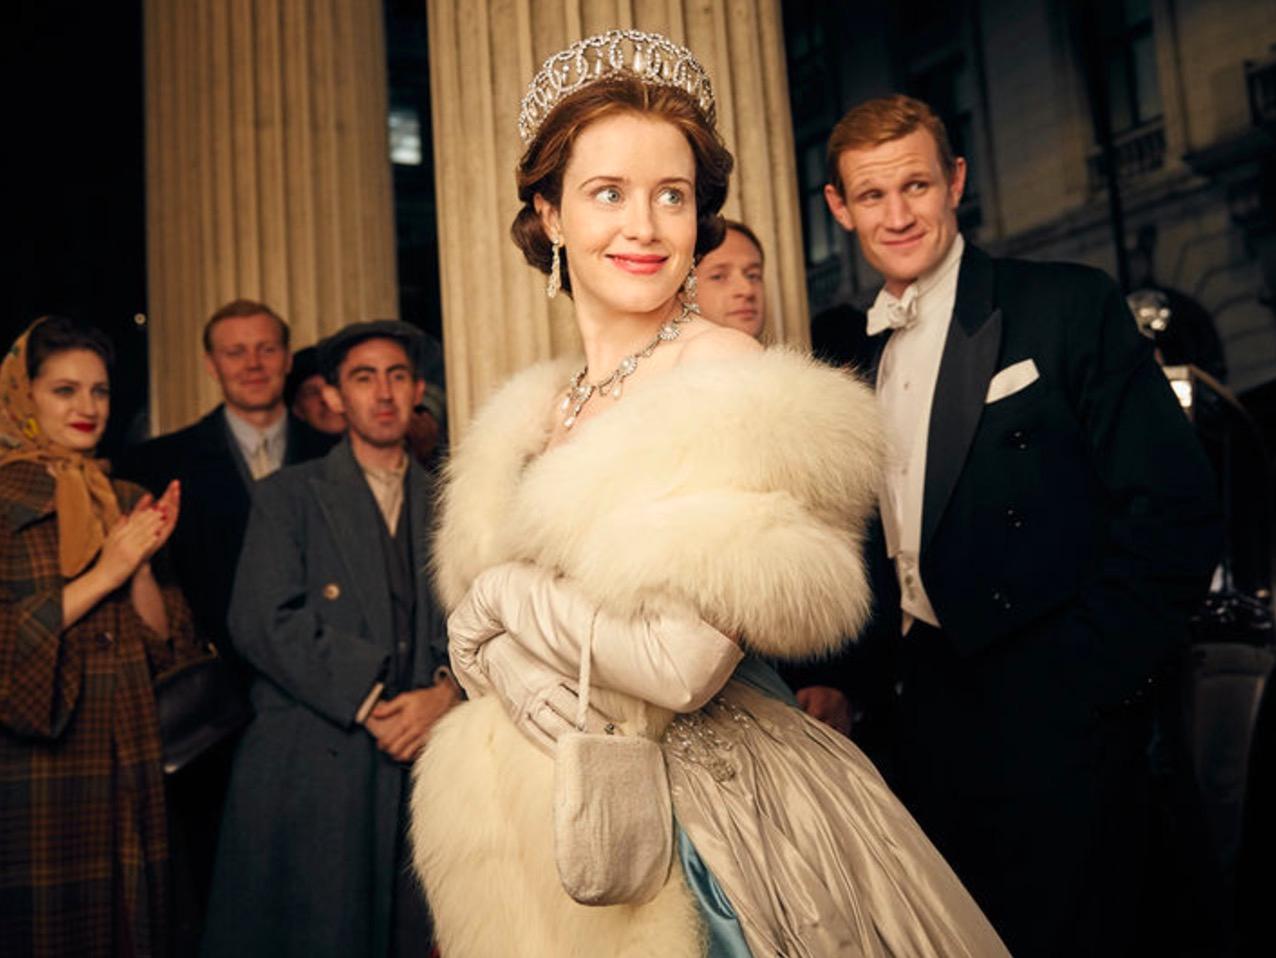 2. ”The crown”.